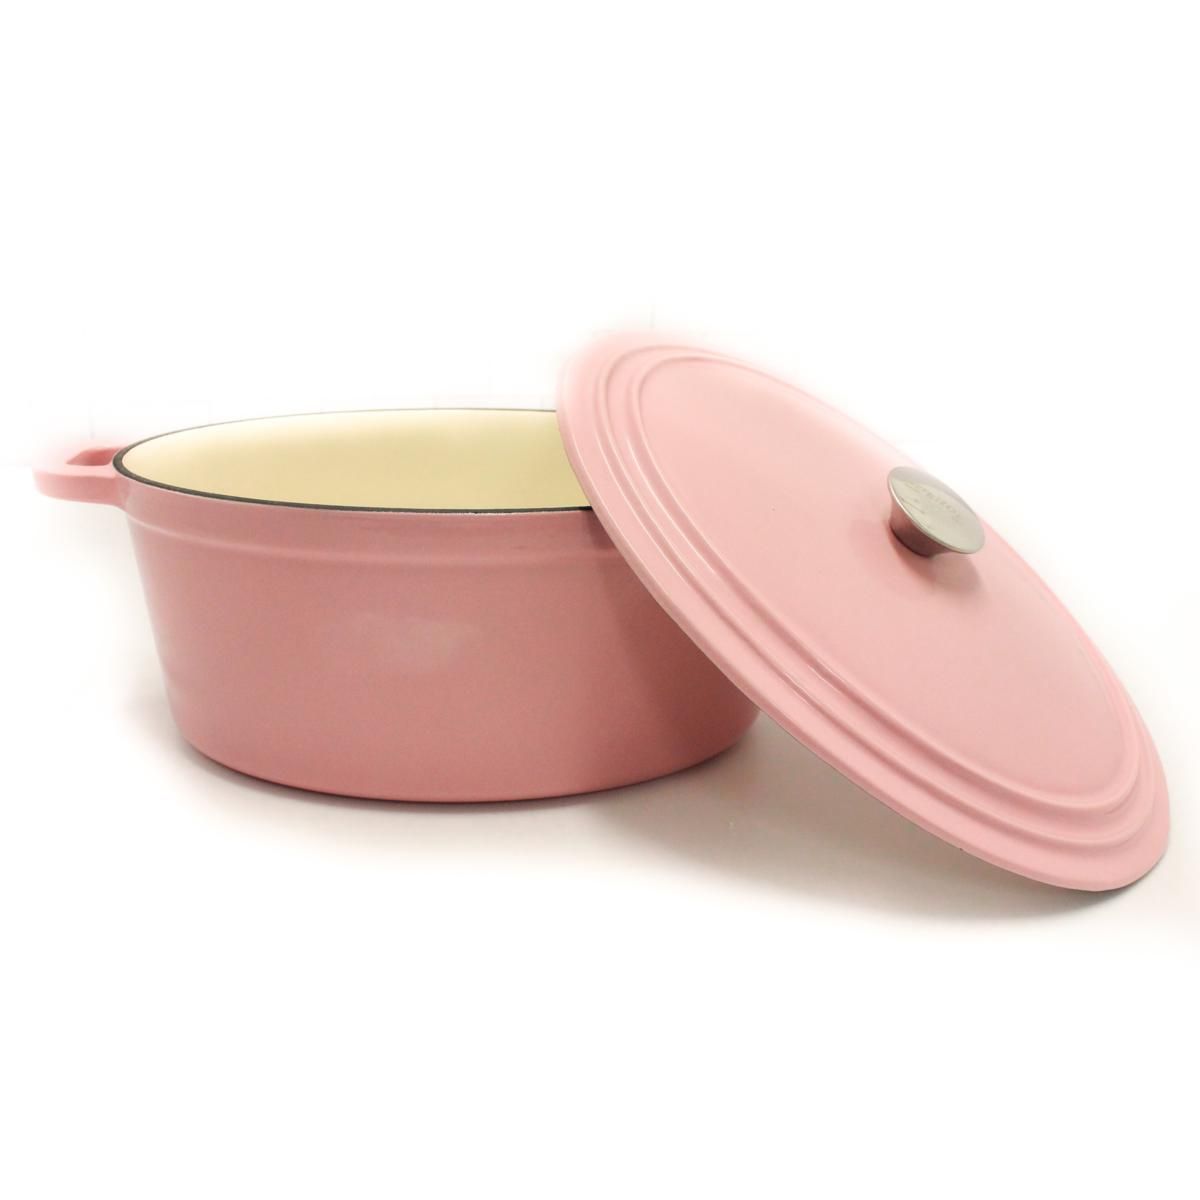 BergHOFF Neo 8-quart Cast Iron Oval Covered Dutch Oven - Pink - 20088682 | HSN | HSN